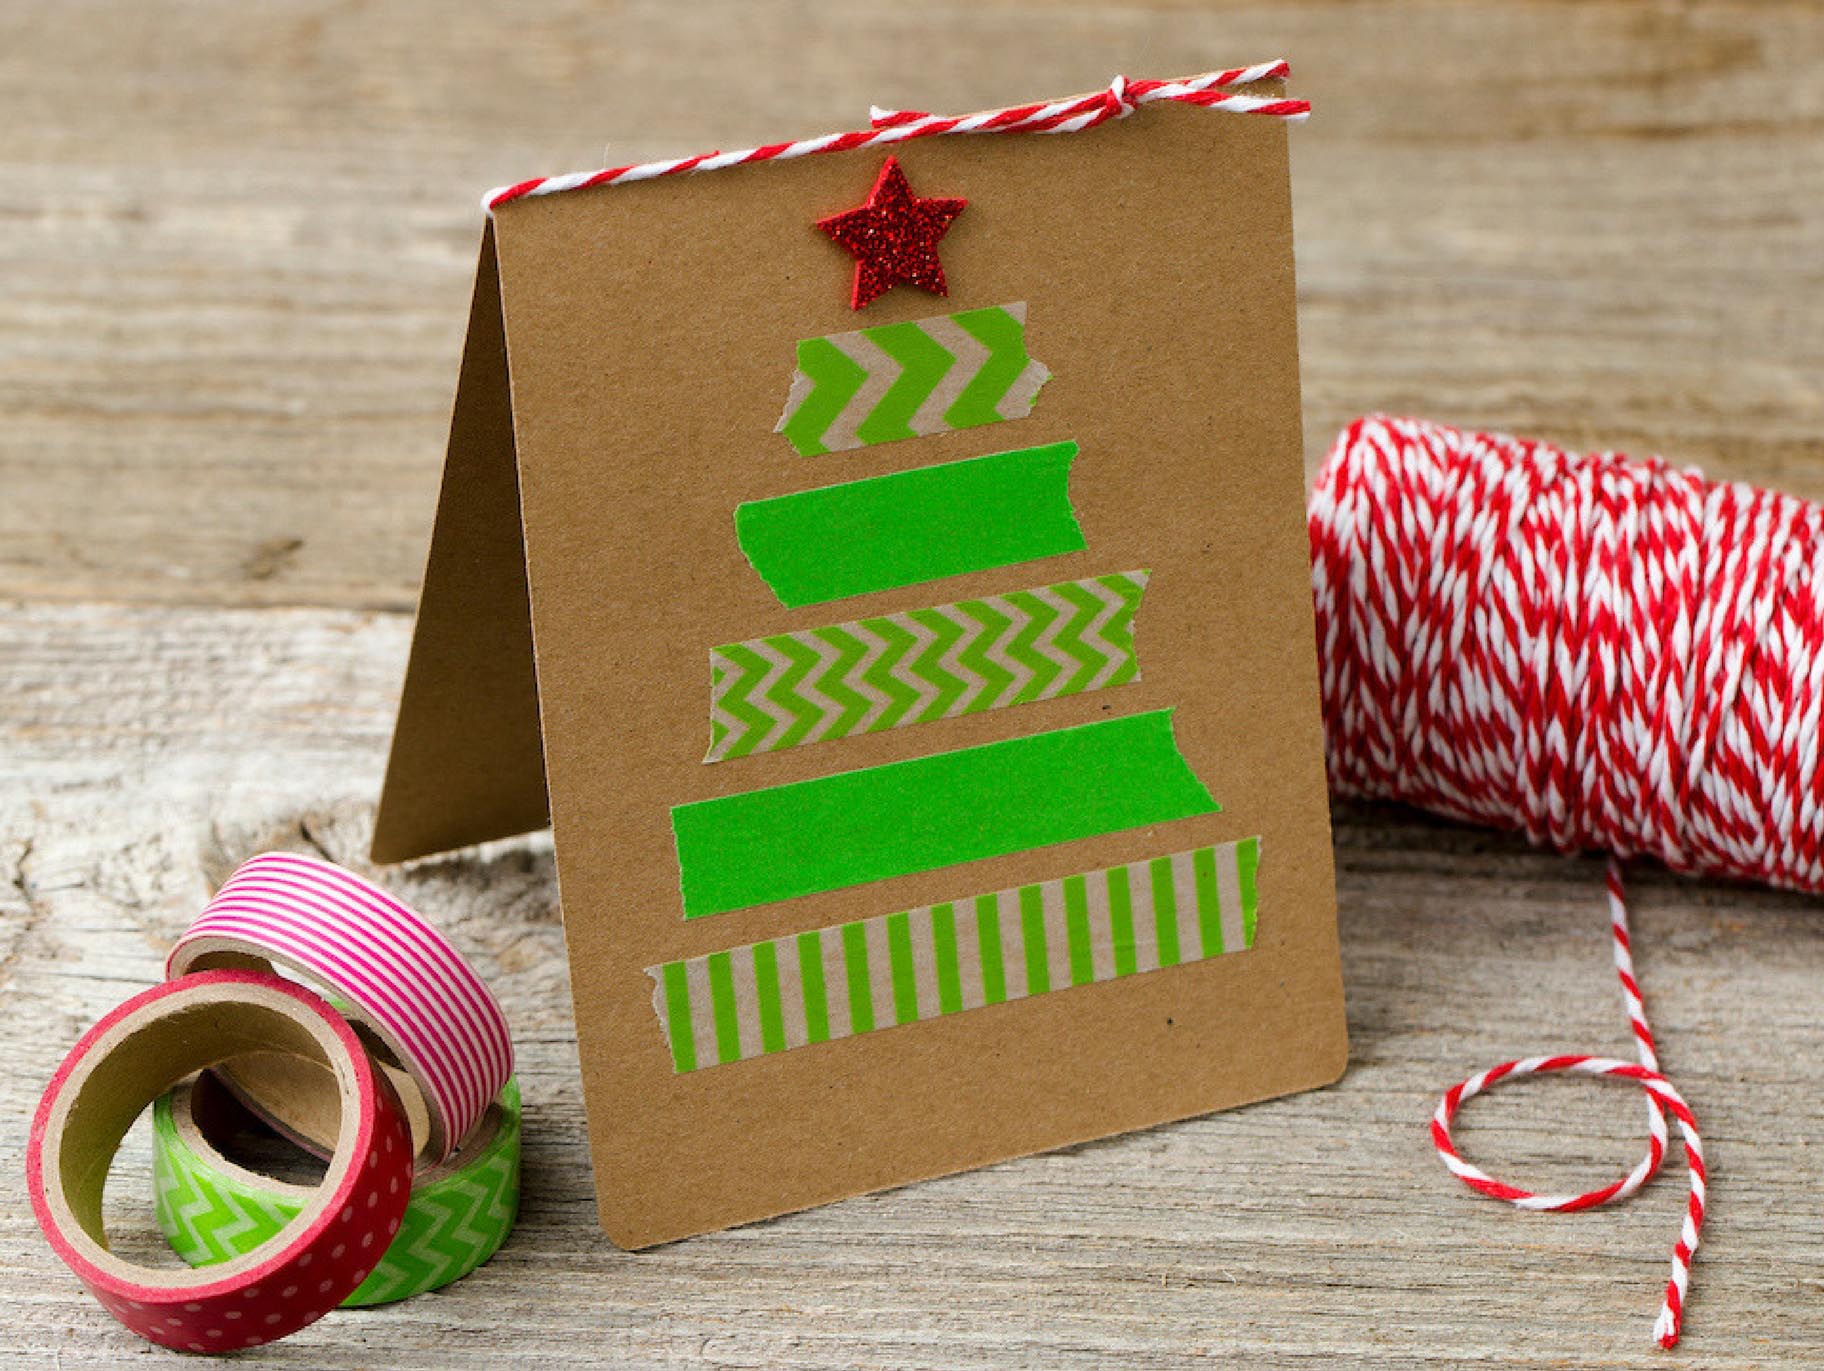 Bugs and Fishes by Lupin: Easy DIY Christmas Card Ideas #1: Washi Tape!